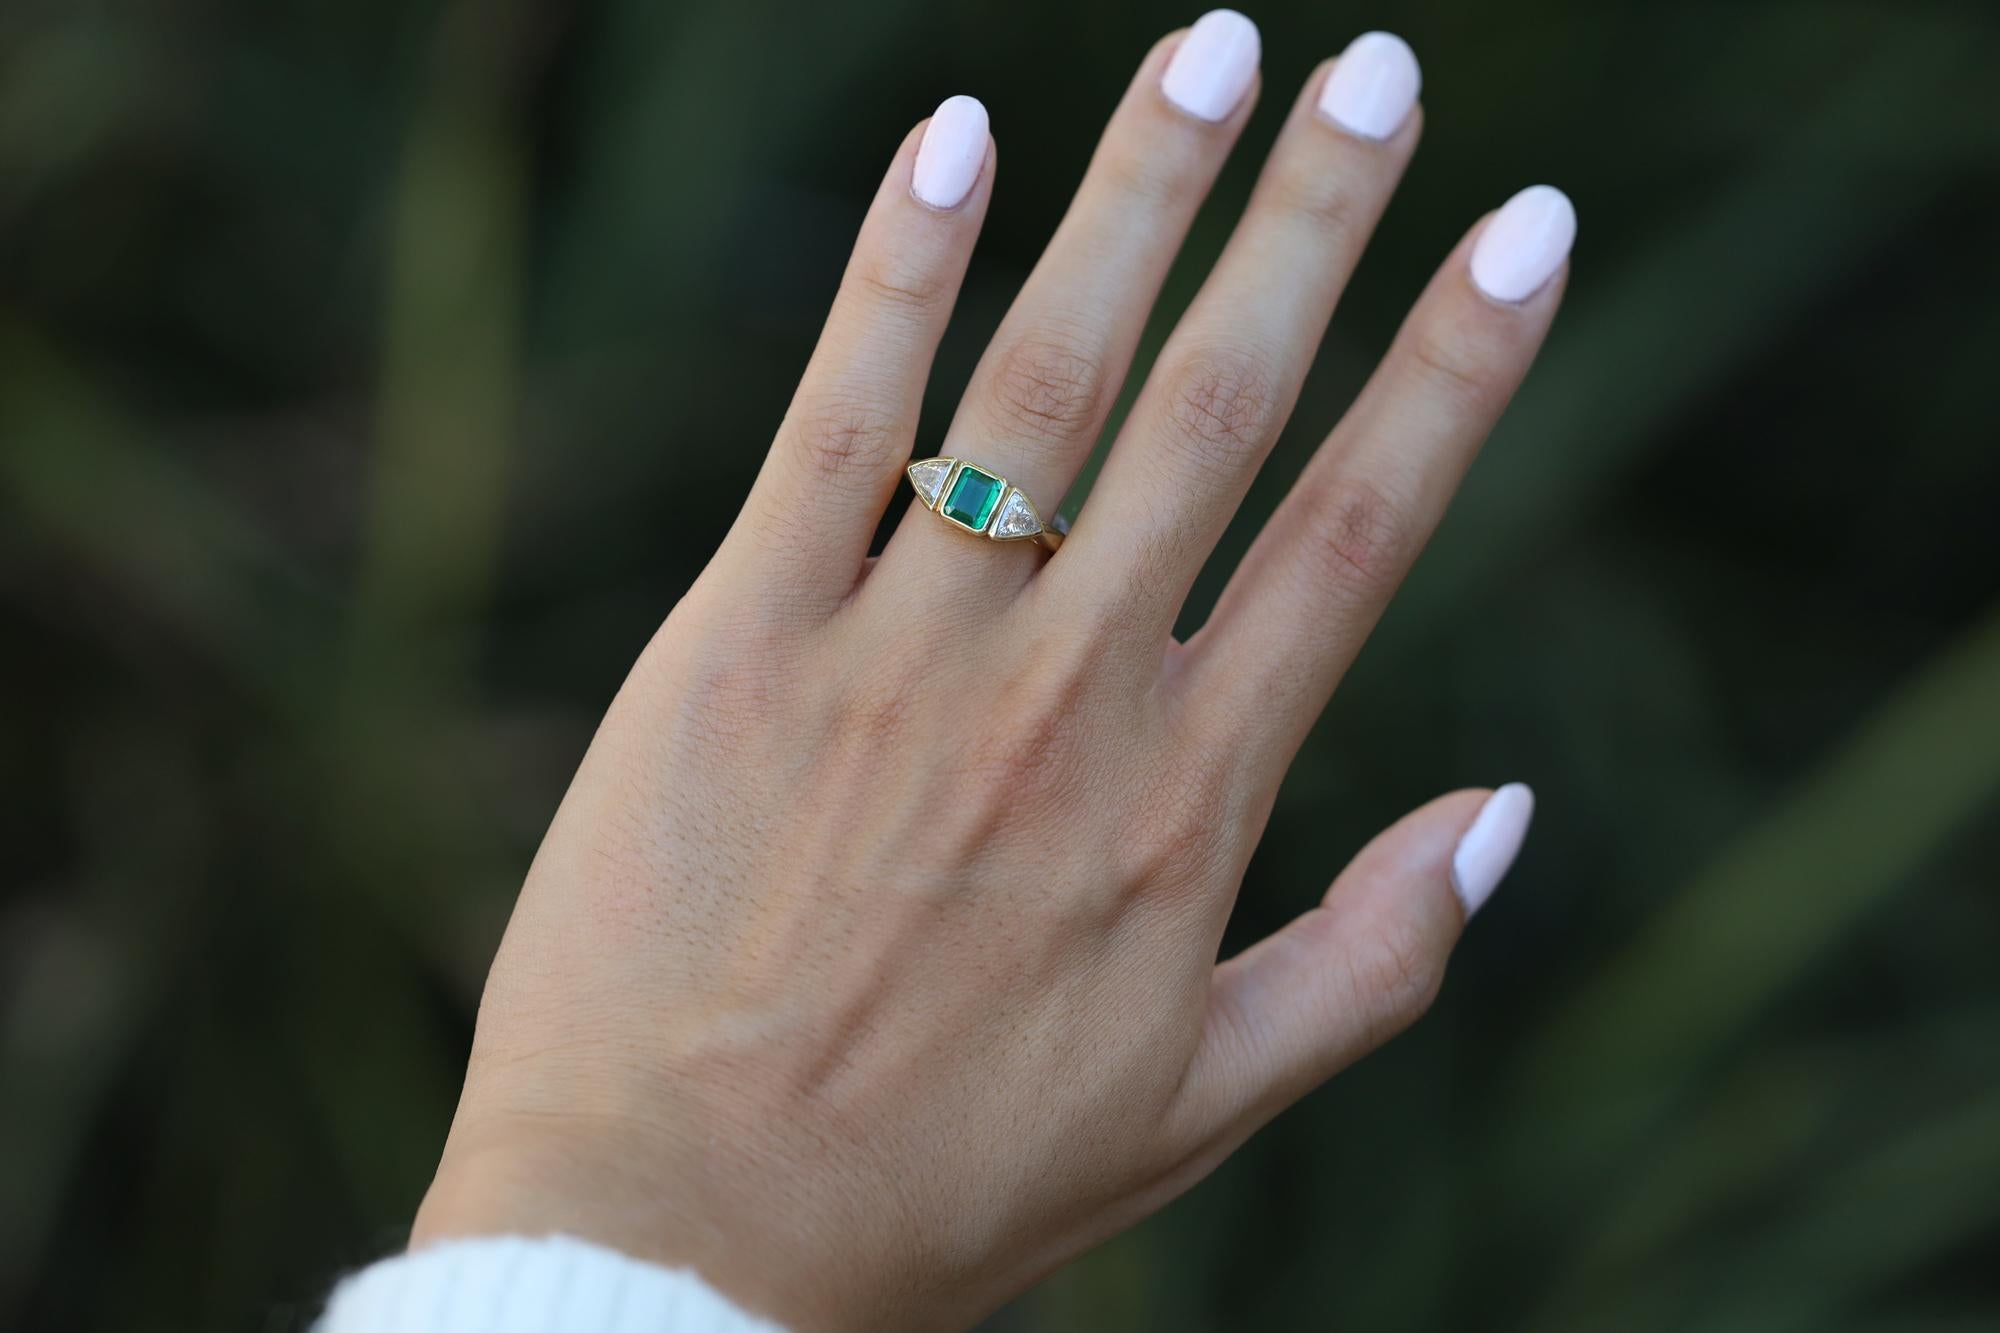 A stunning vintage estate engagement ring from the estate of Hollywood icon Robert Mitchum. Hand crafted with a timeless, early contemporary impression. The trinity centers on a natural emerald weighing 0.97 carats, a vivid green presenting